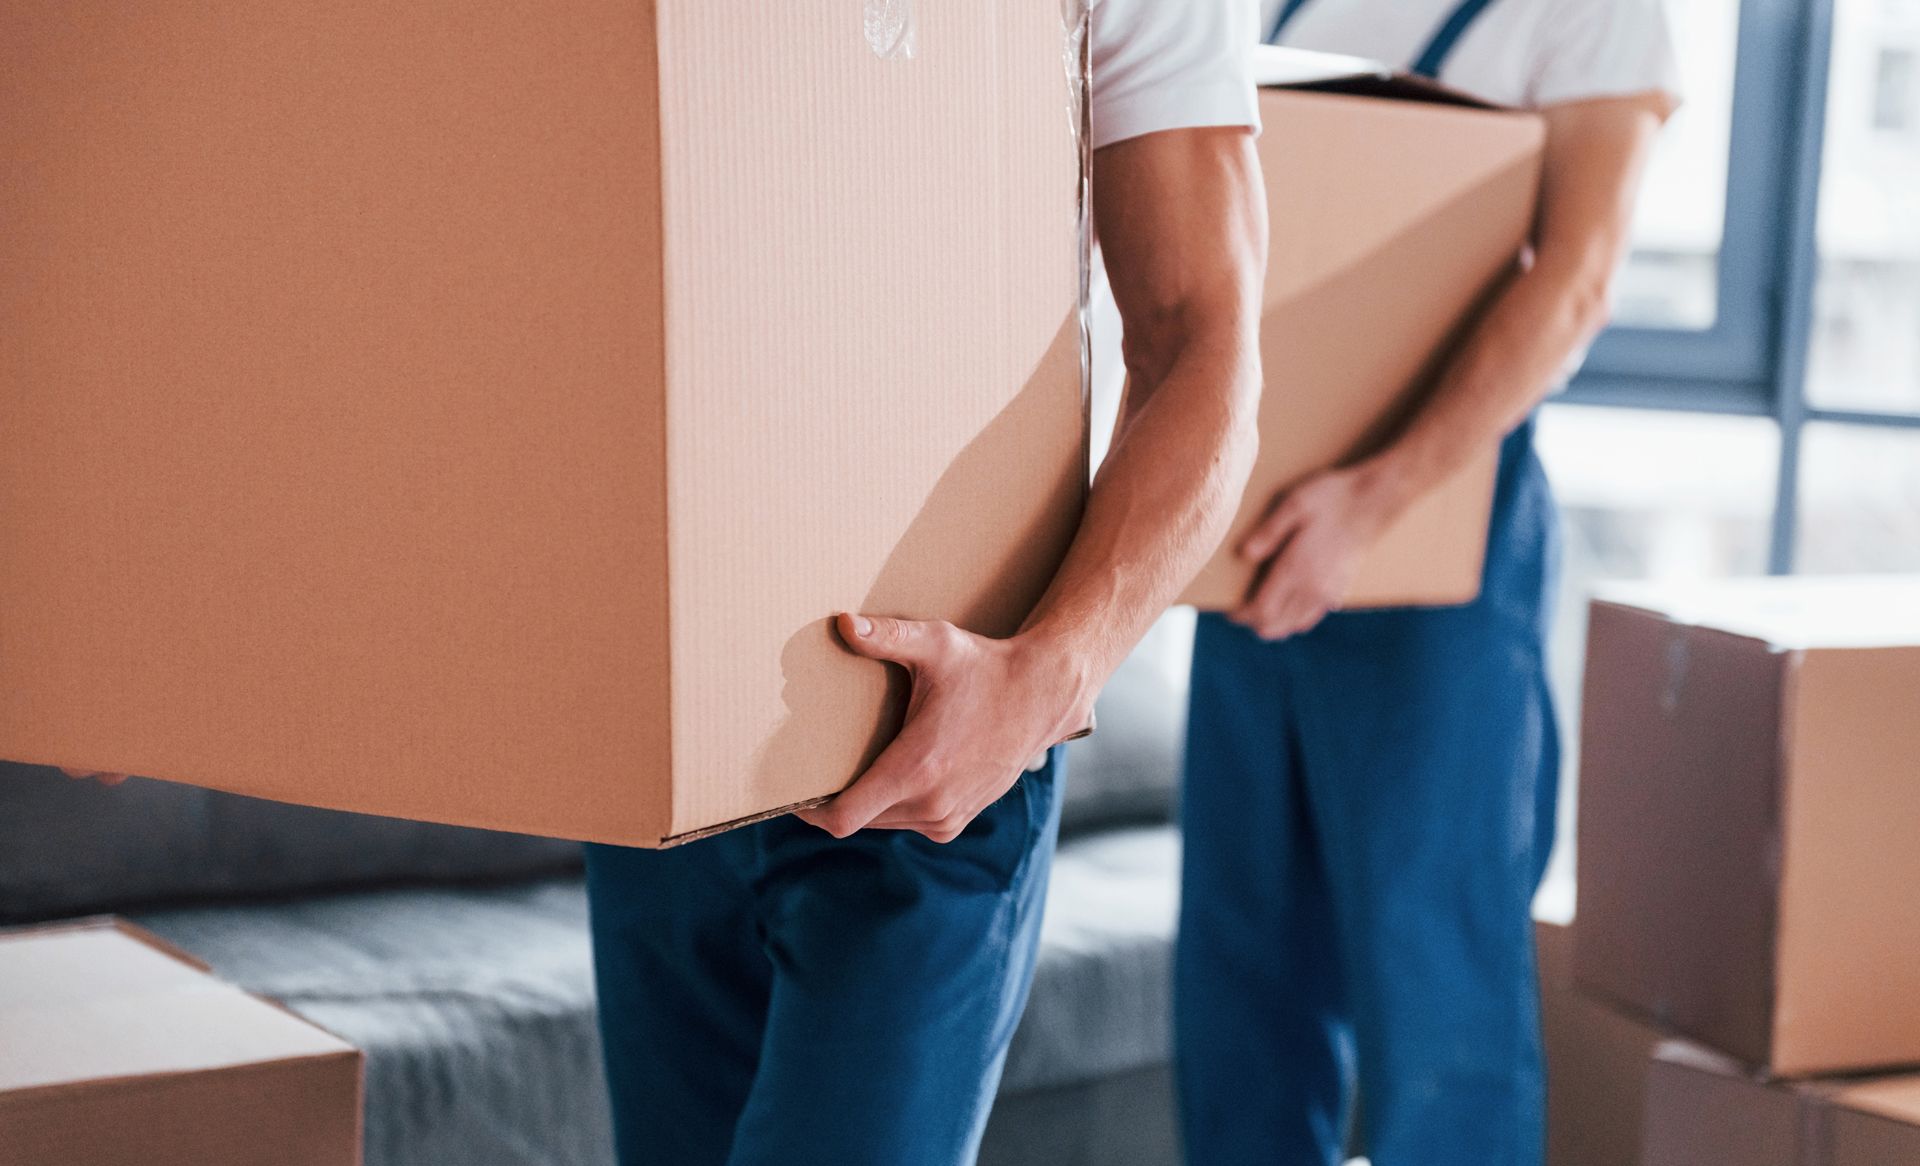 Two Men Are Carrying Cardboard Boxes in a Living Room 